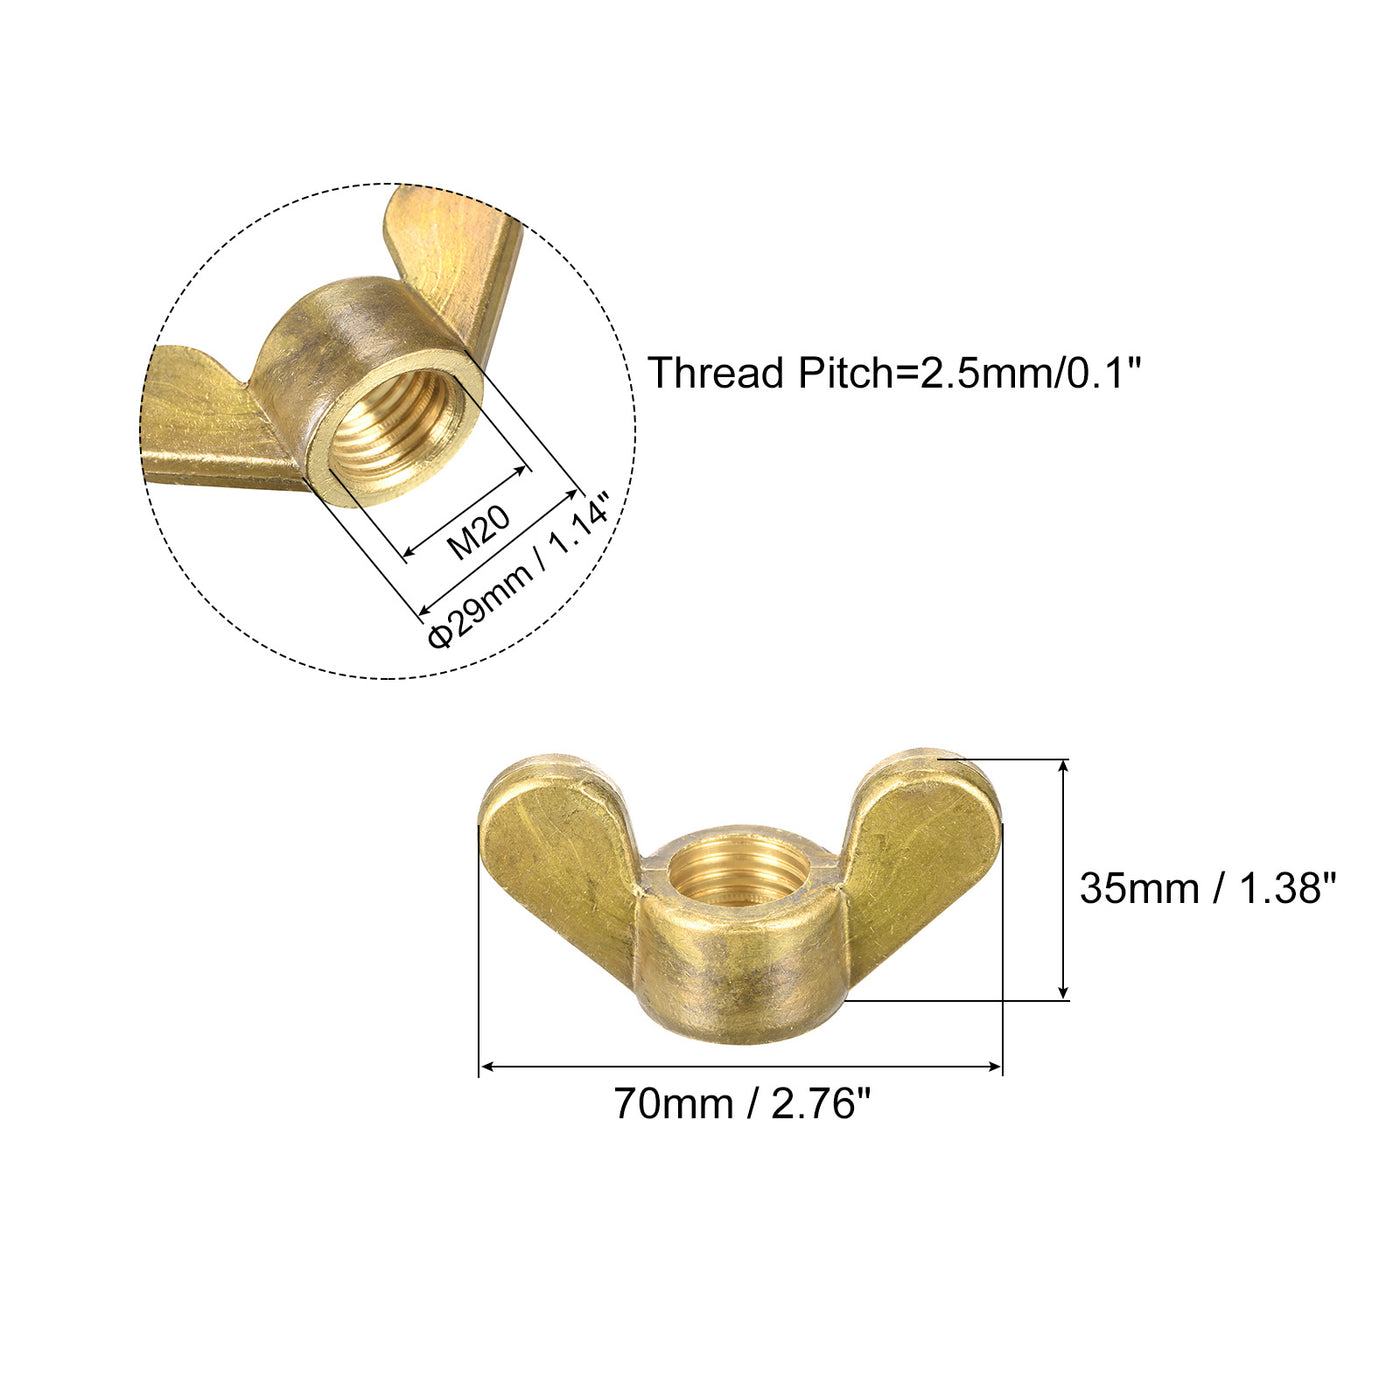 uxcell Uxcell Brass Wing Nuts, M20 Butterfly Nut Hand Twist Tighten Fasteners for Furniture, Machinery, Electronic Equipment, 2Pcs